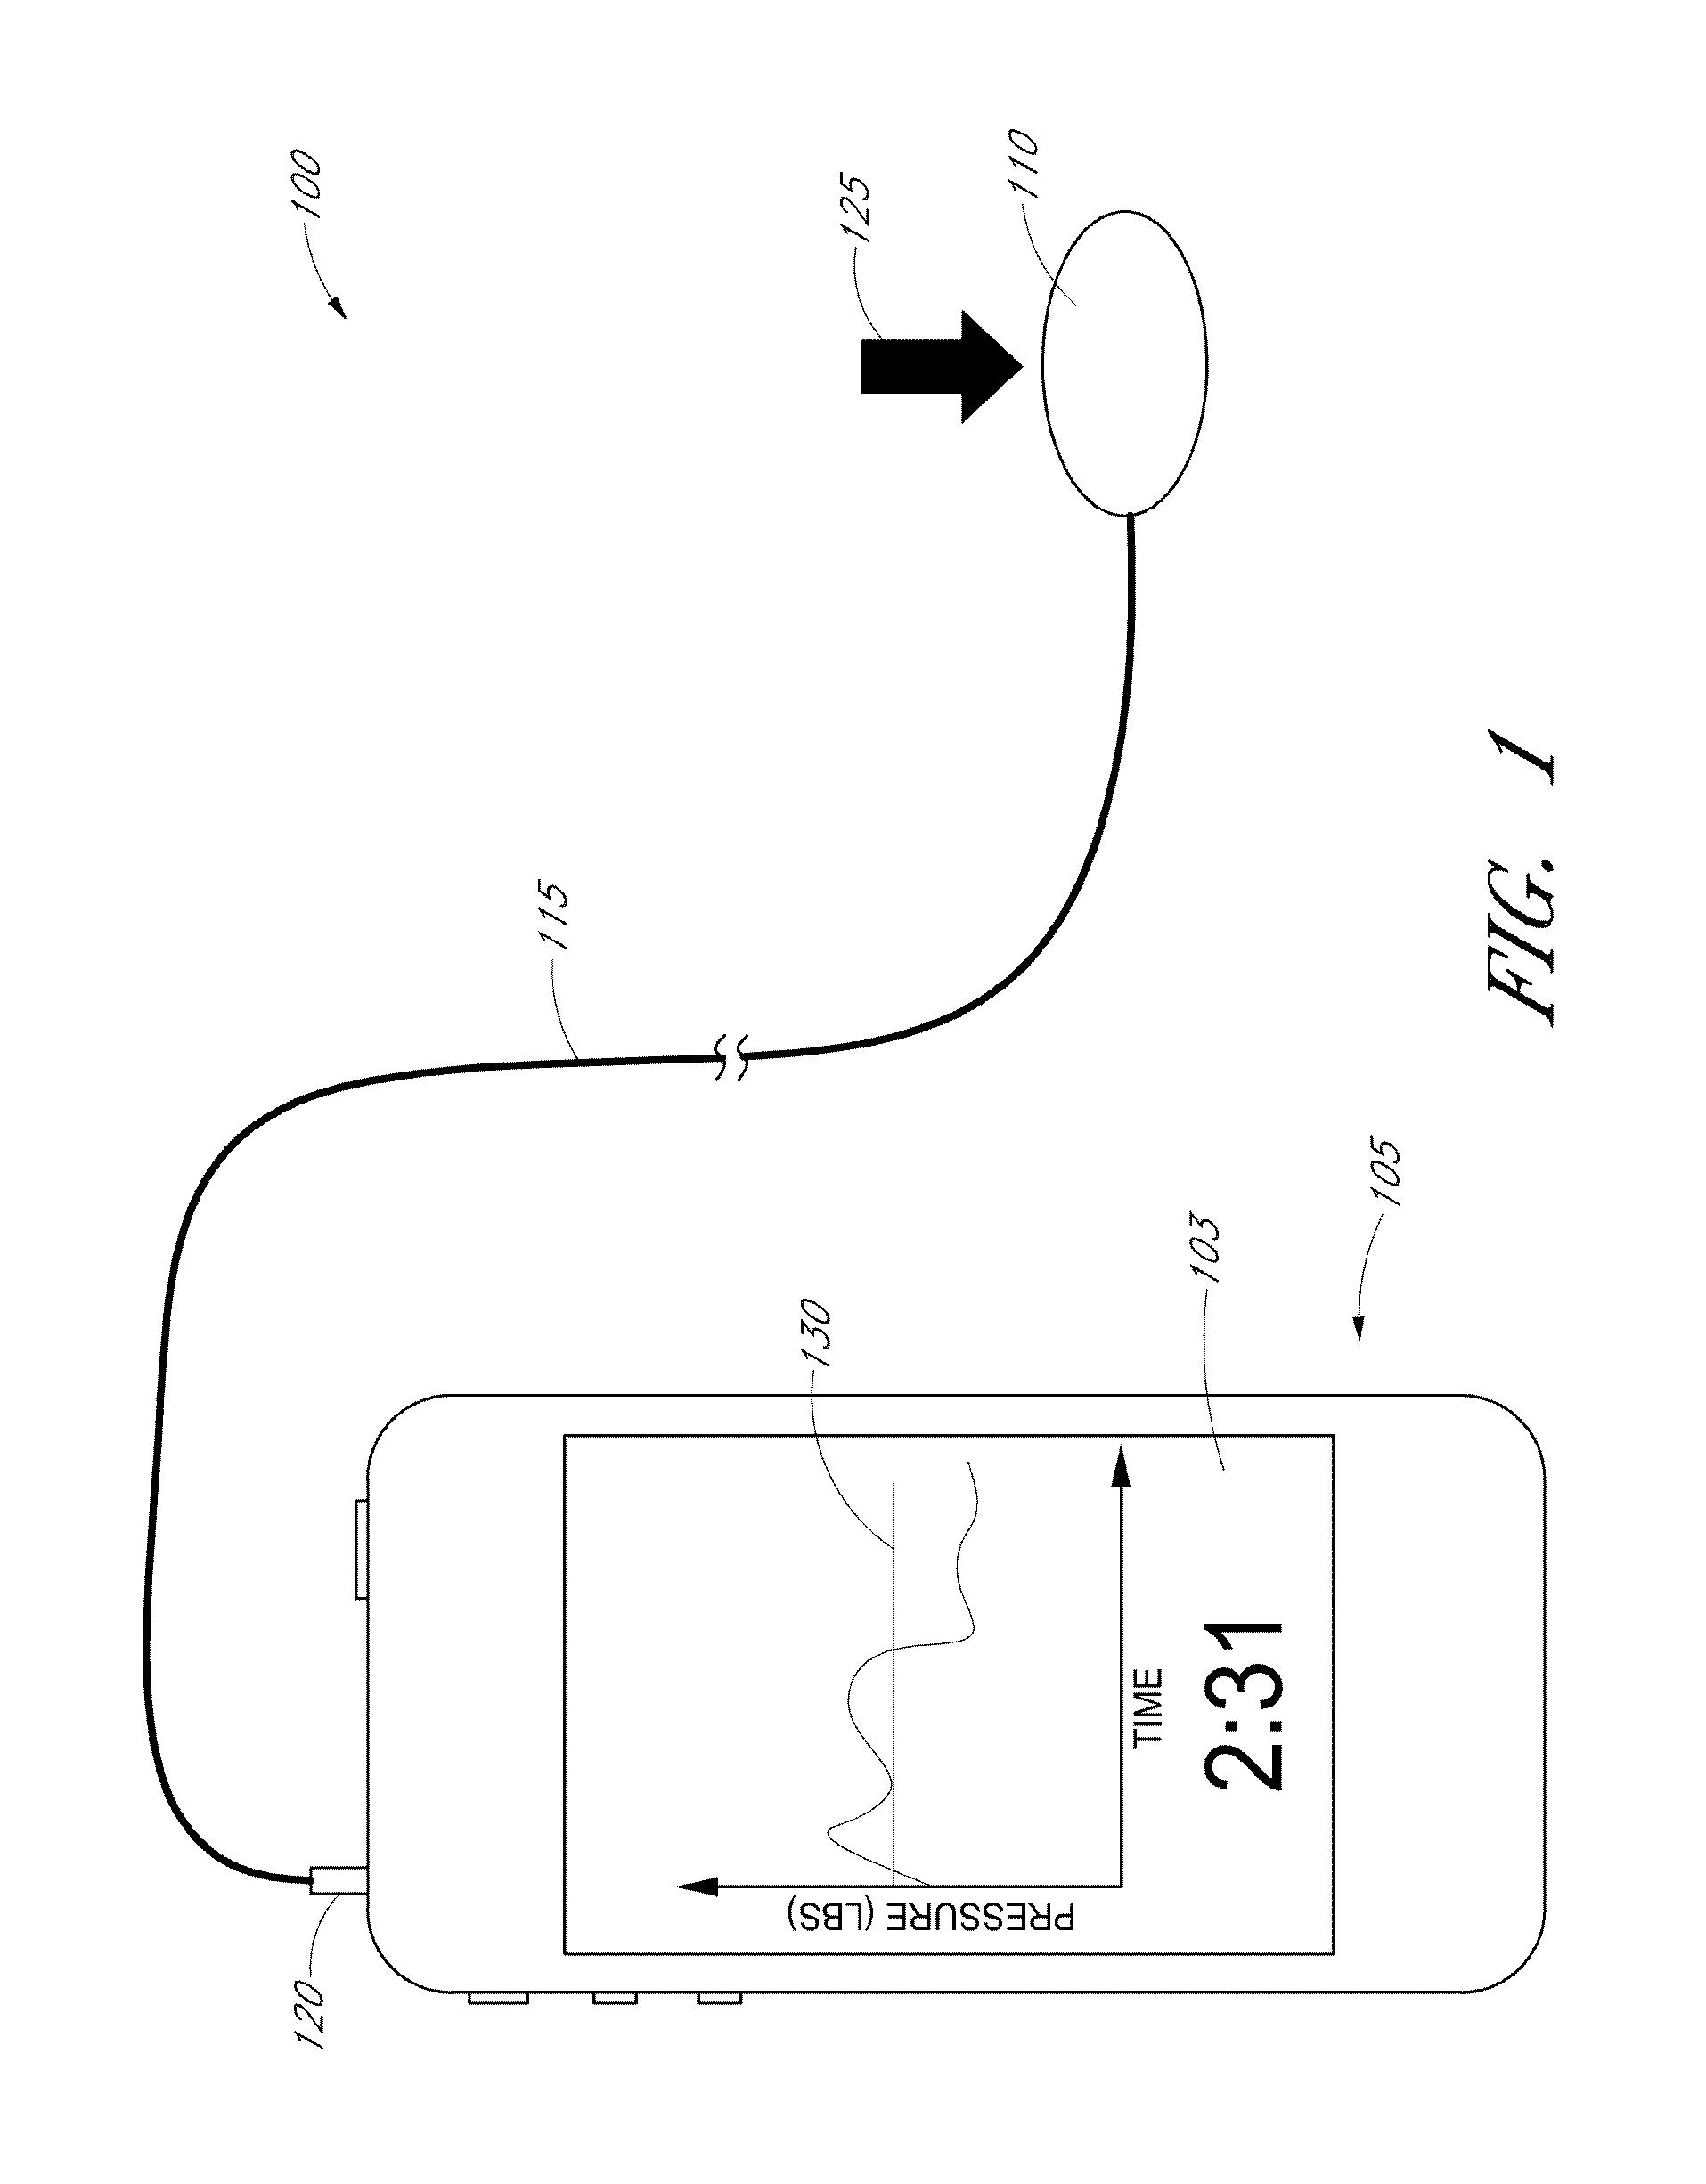 Systems and methods for providing hemorrhage control training